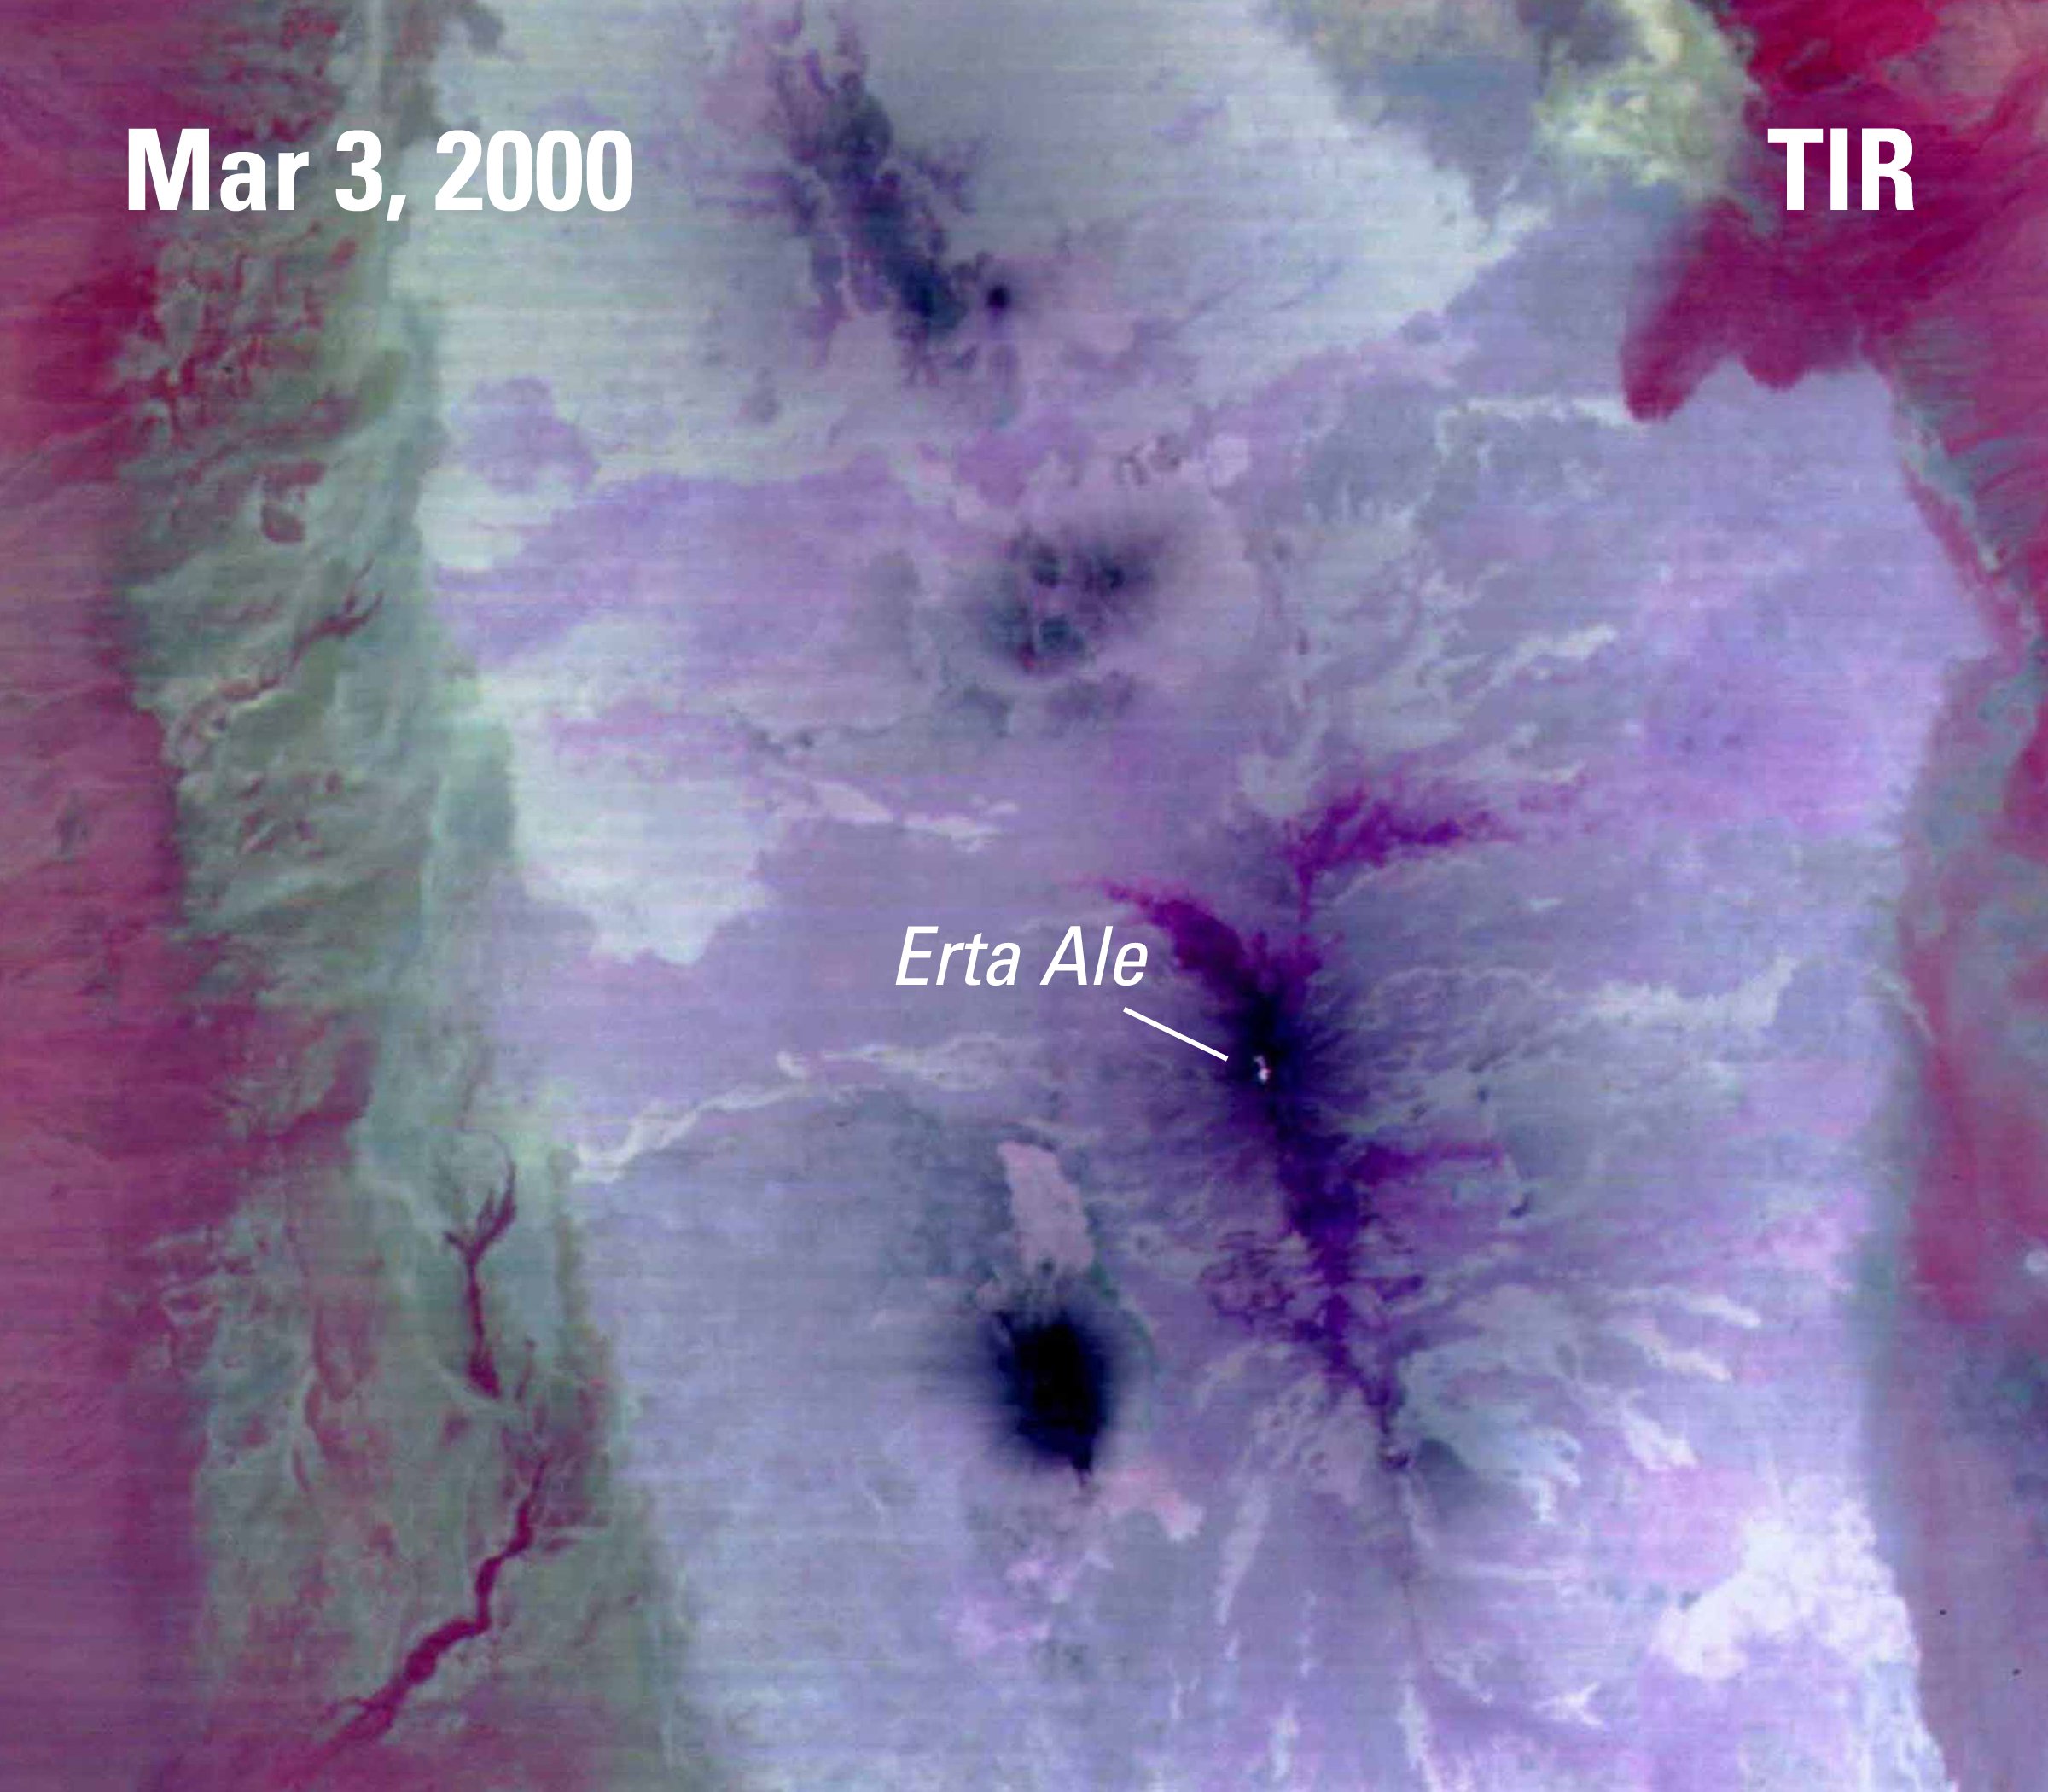 ASTER TIR data, acquired on March 3, 2000 over Erta Ale.